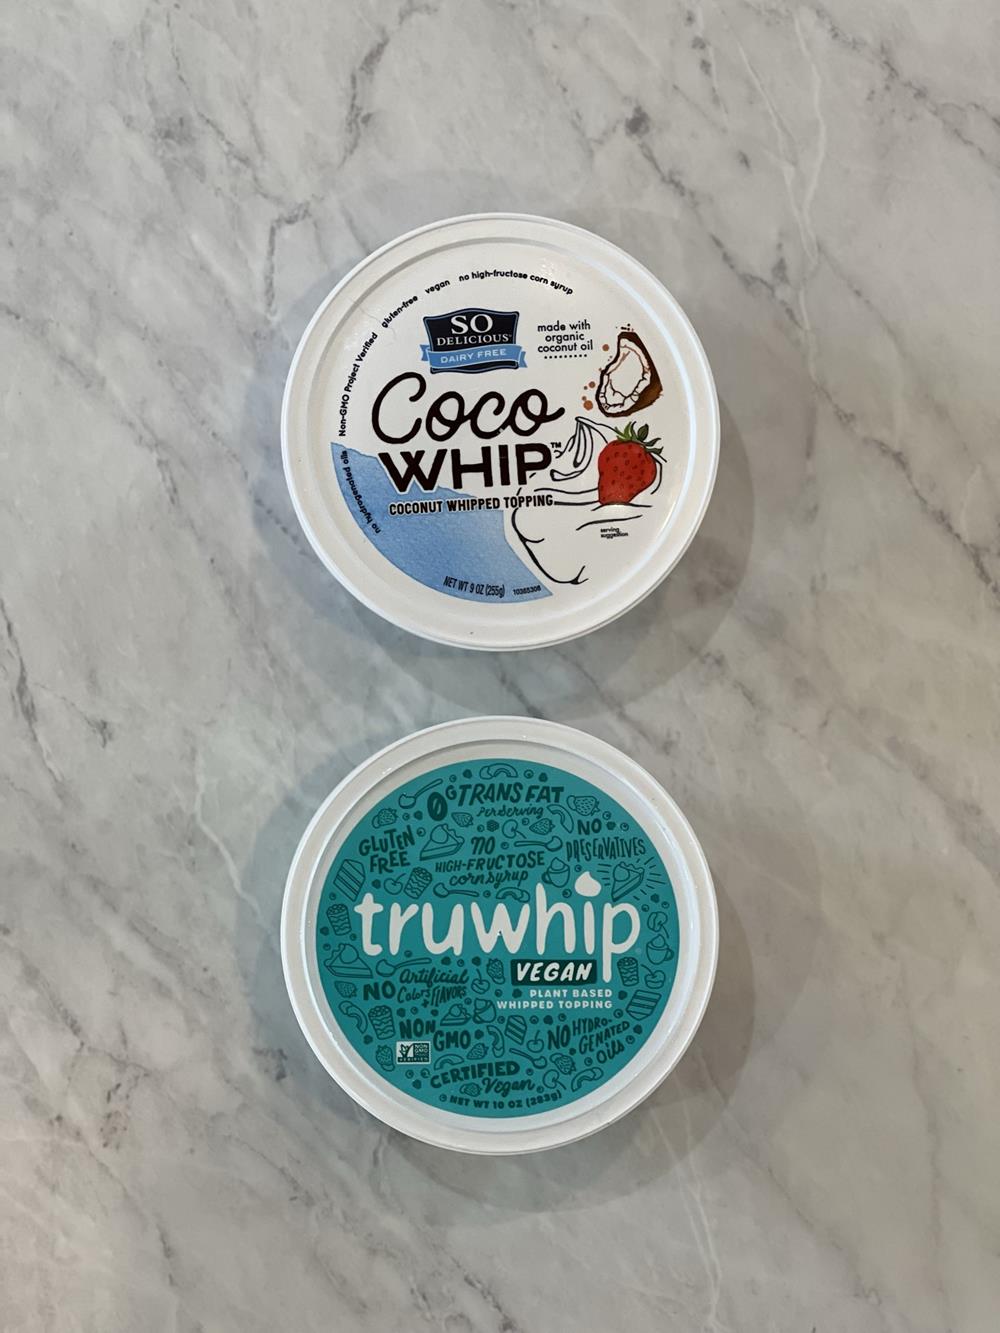 So Delicious CocoWhip Dairy Free Whipped Topping Reviews & Info  Dairy free  dessert, Dairy free whipped topping, Allergy free recipes